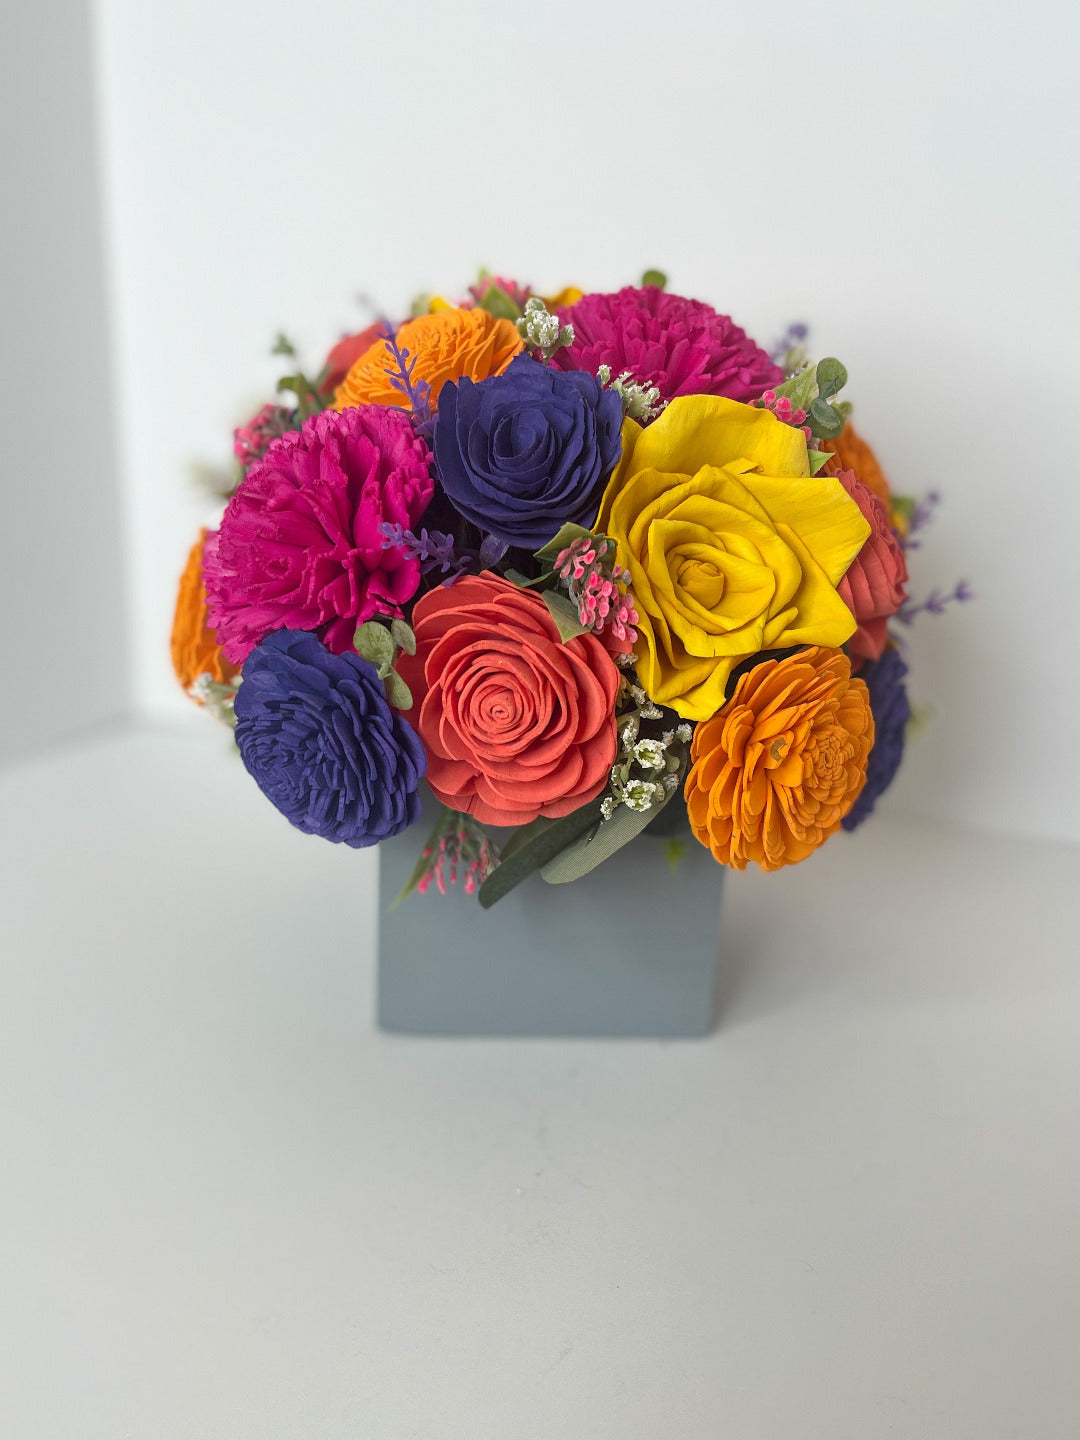 Bright colored summer bouquet with purple, yellow, orange & pink wooden flowers placed in grey box.